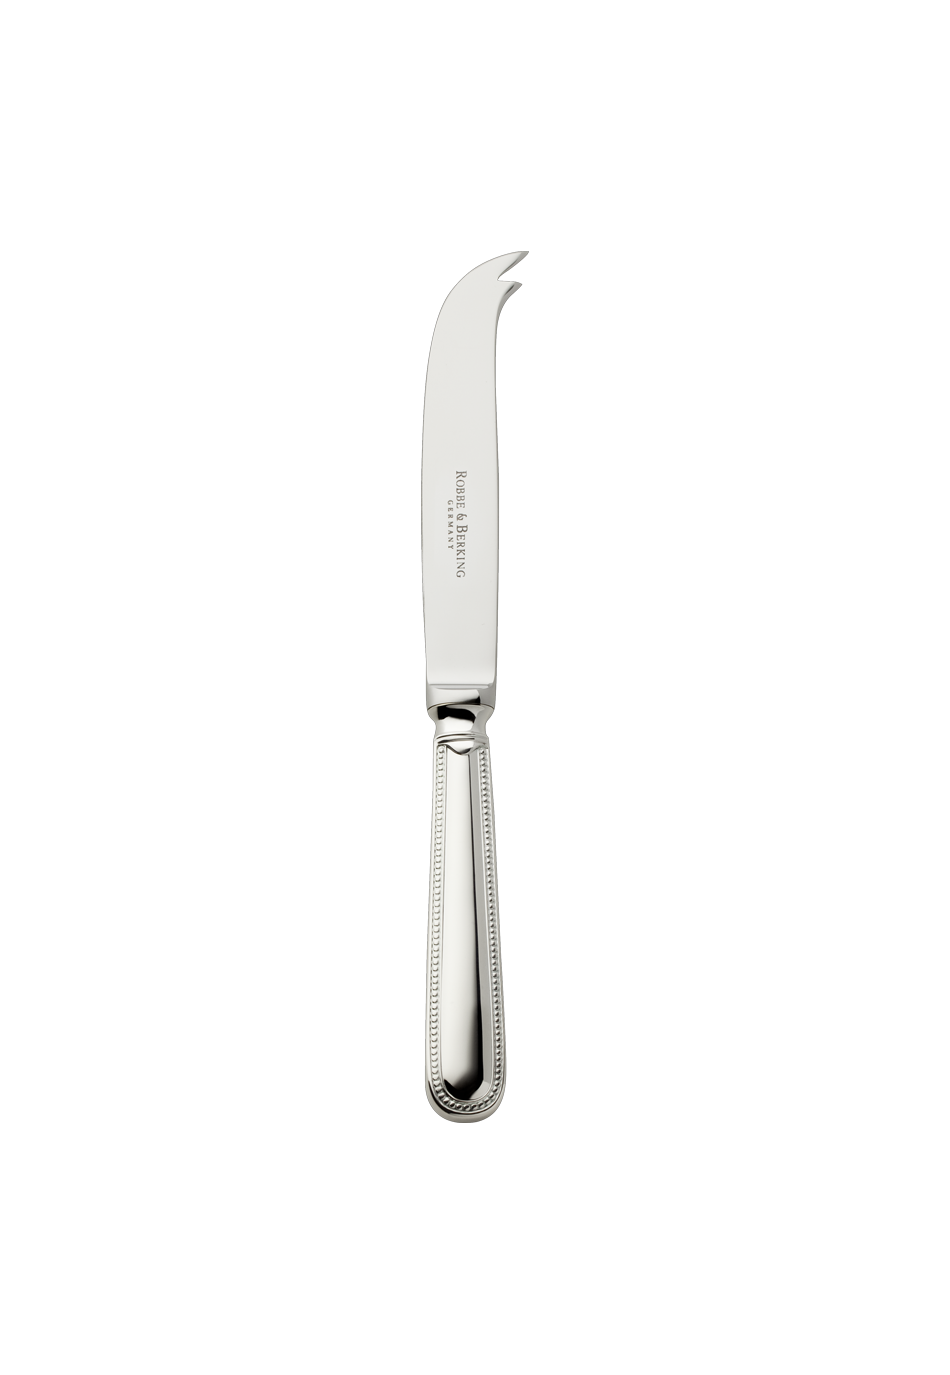 Franz. Perl Cheese Knife (150g massive silverplated)